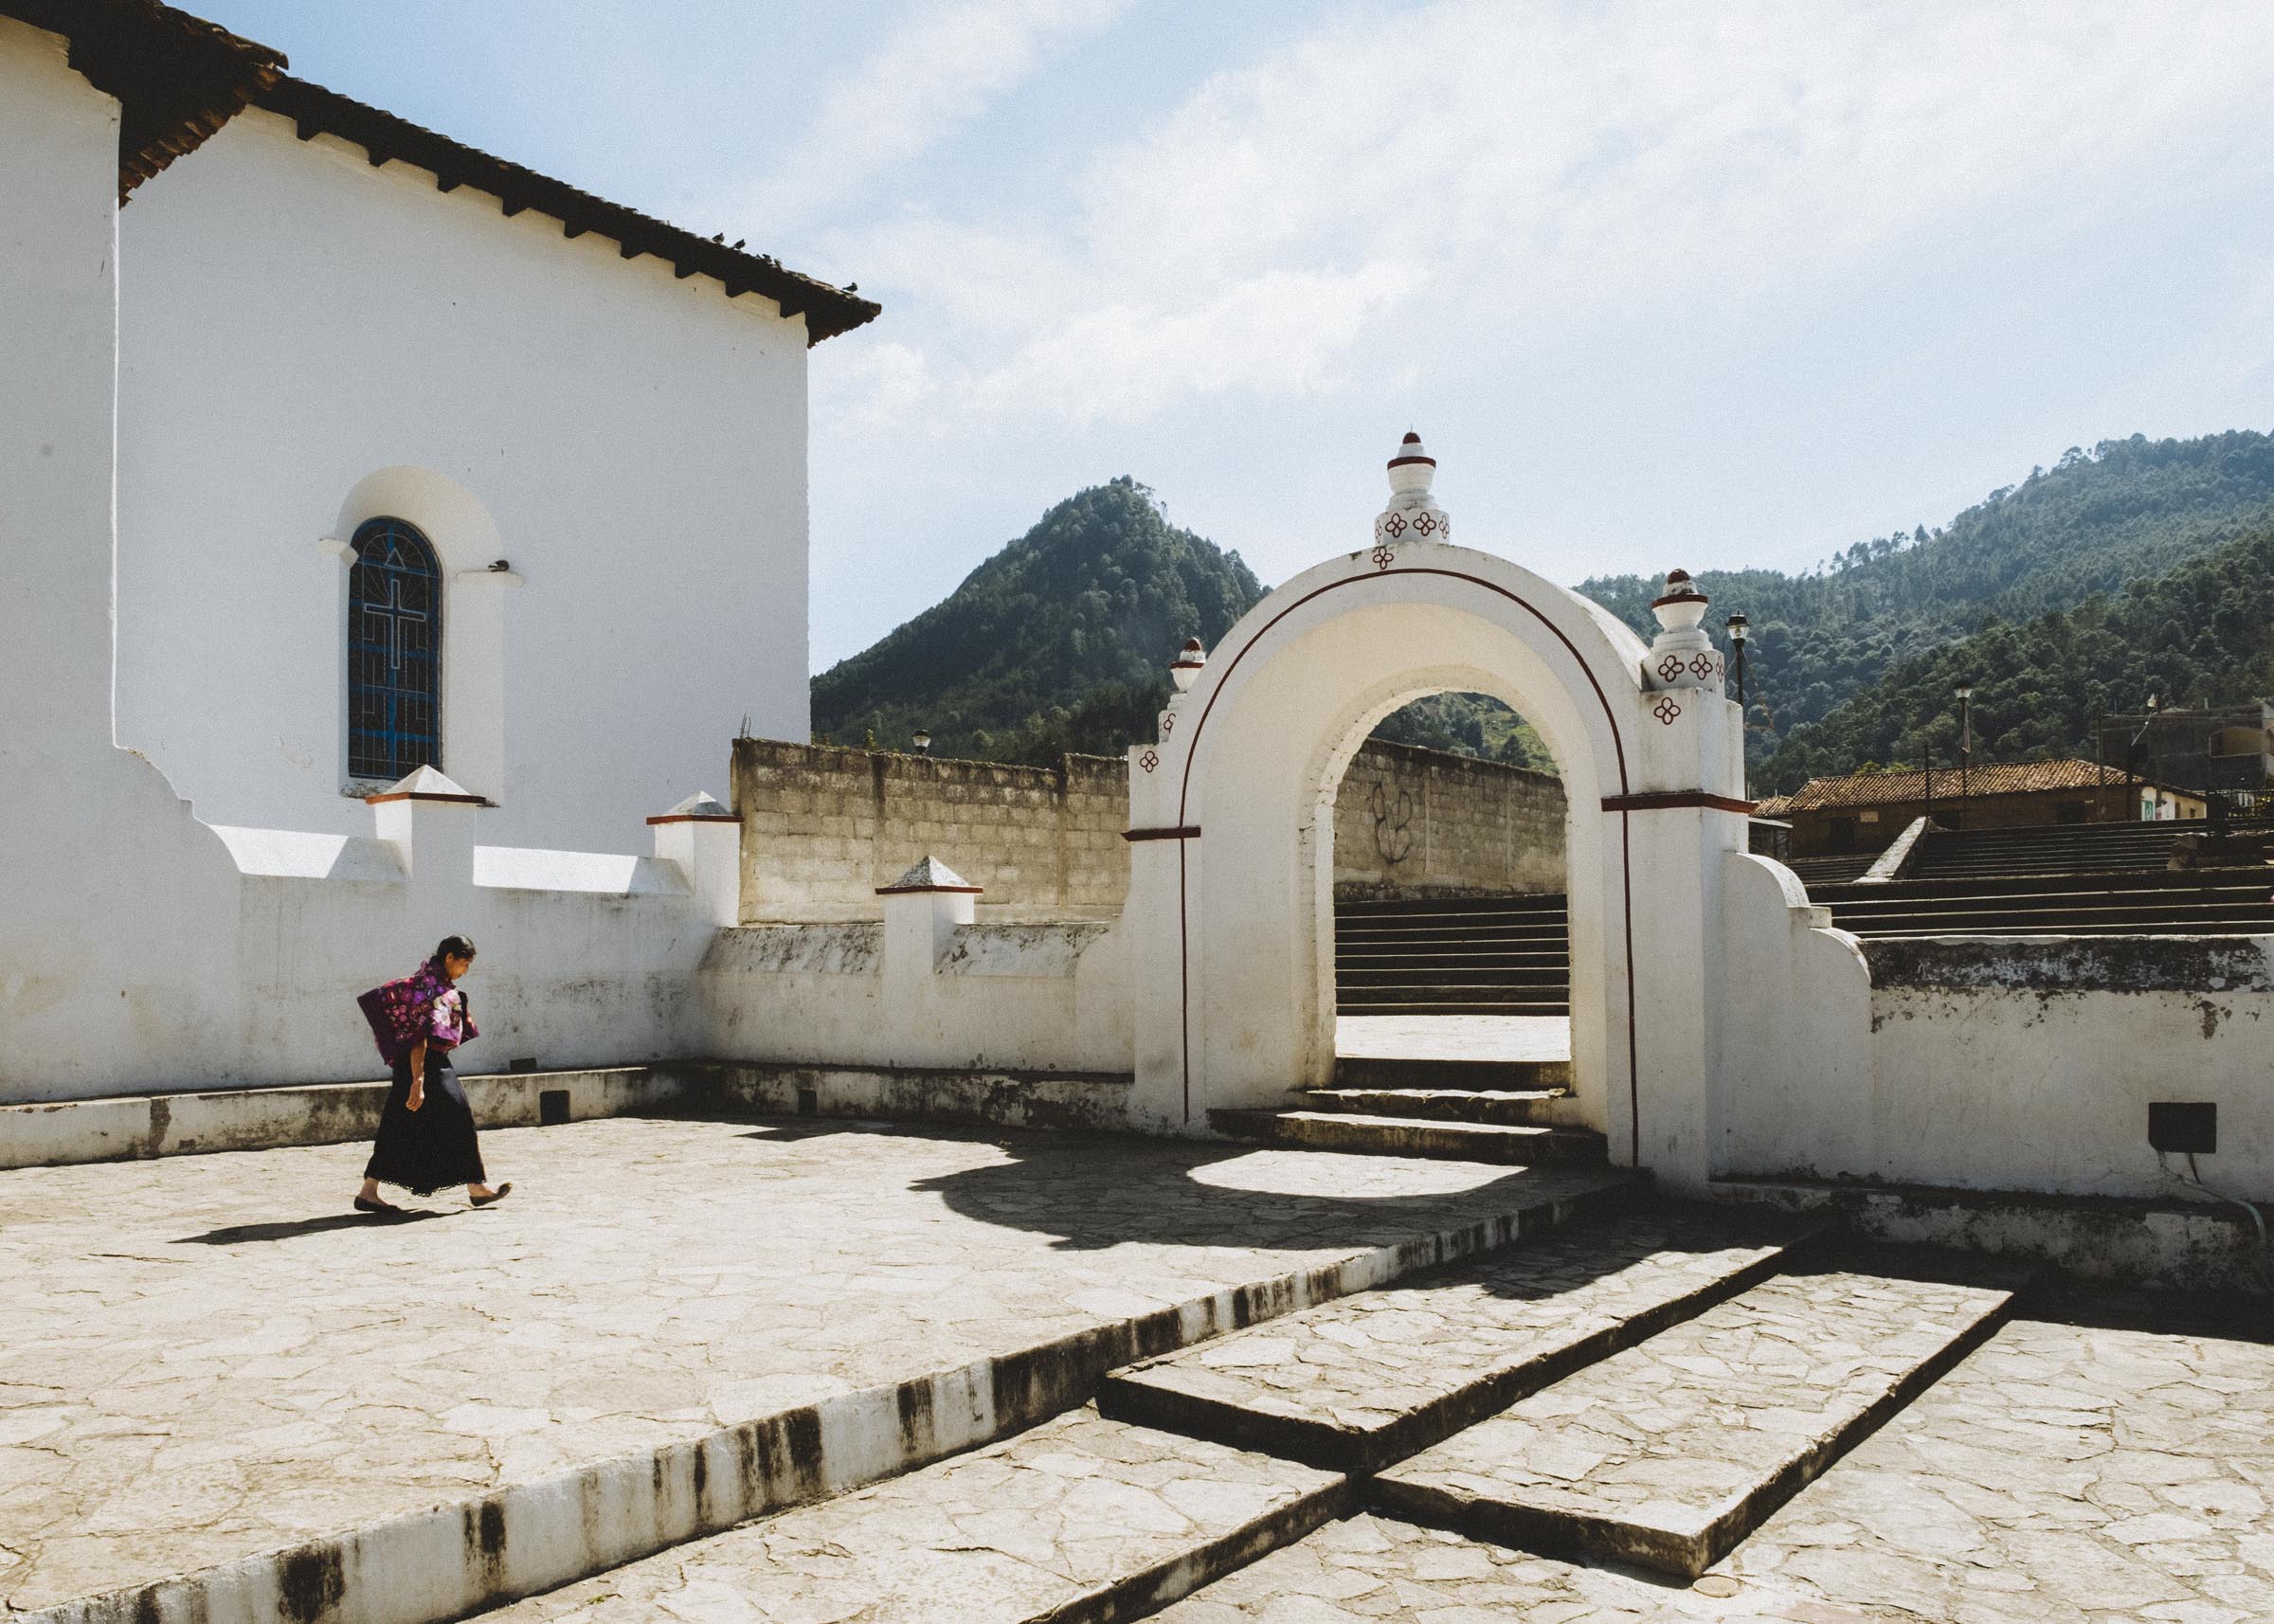 In the tiny town of Chamula, Chiapas